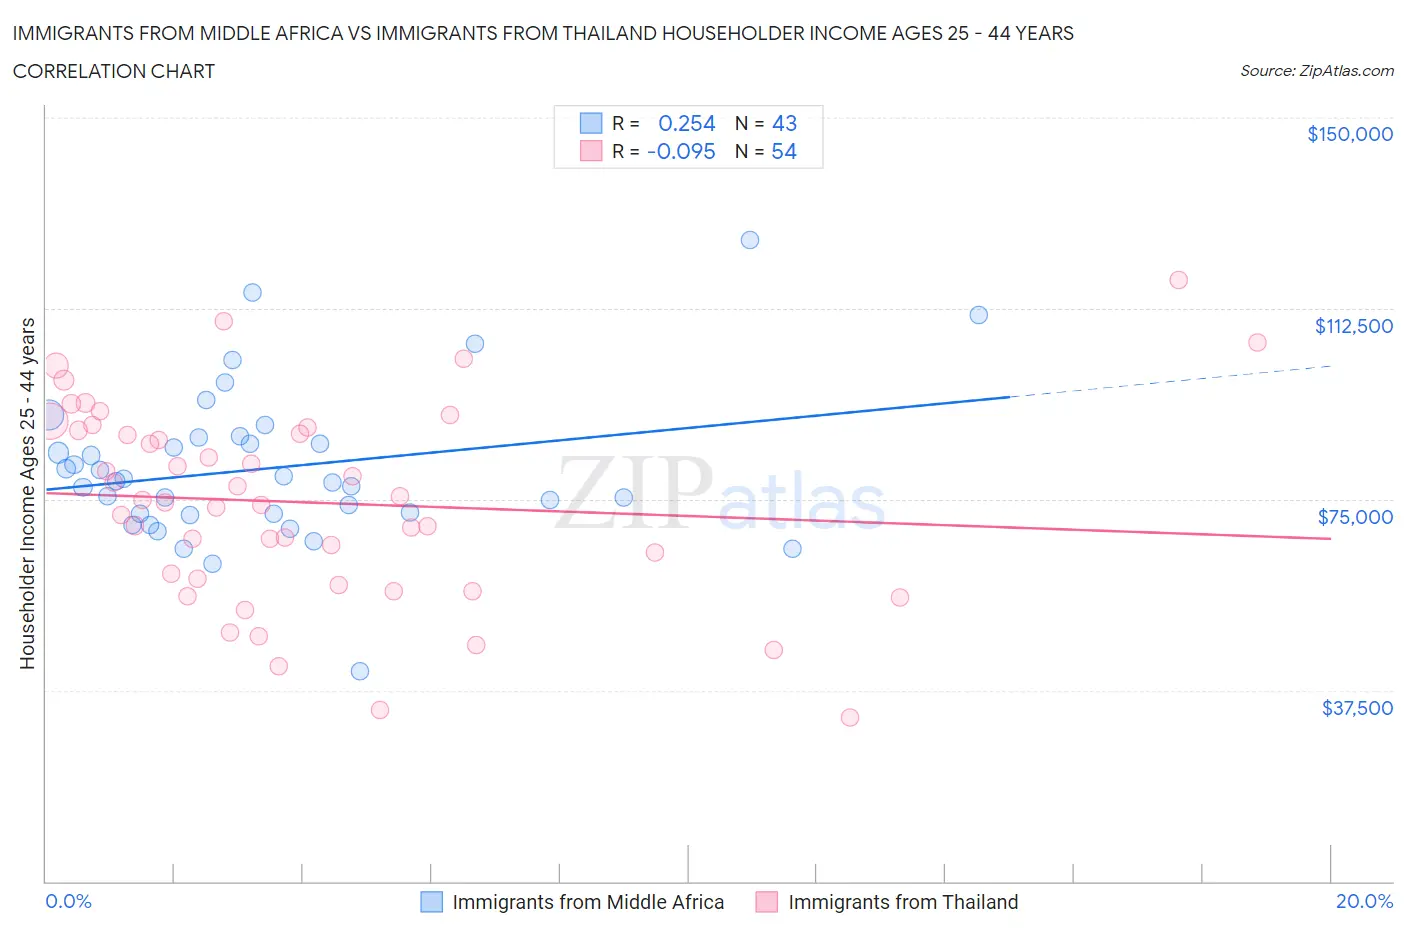 Immigrants from Middle Africa vs Immigrants from Thailand Householder Income Ages 25 - 44 years